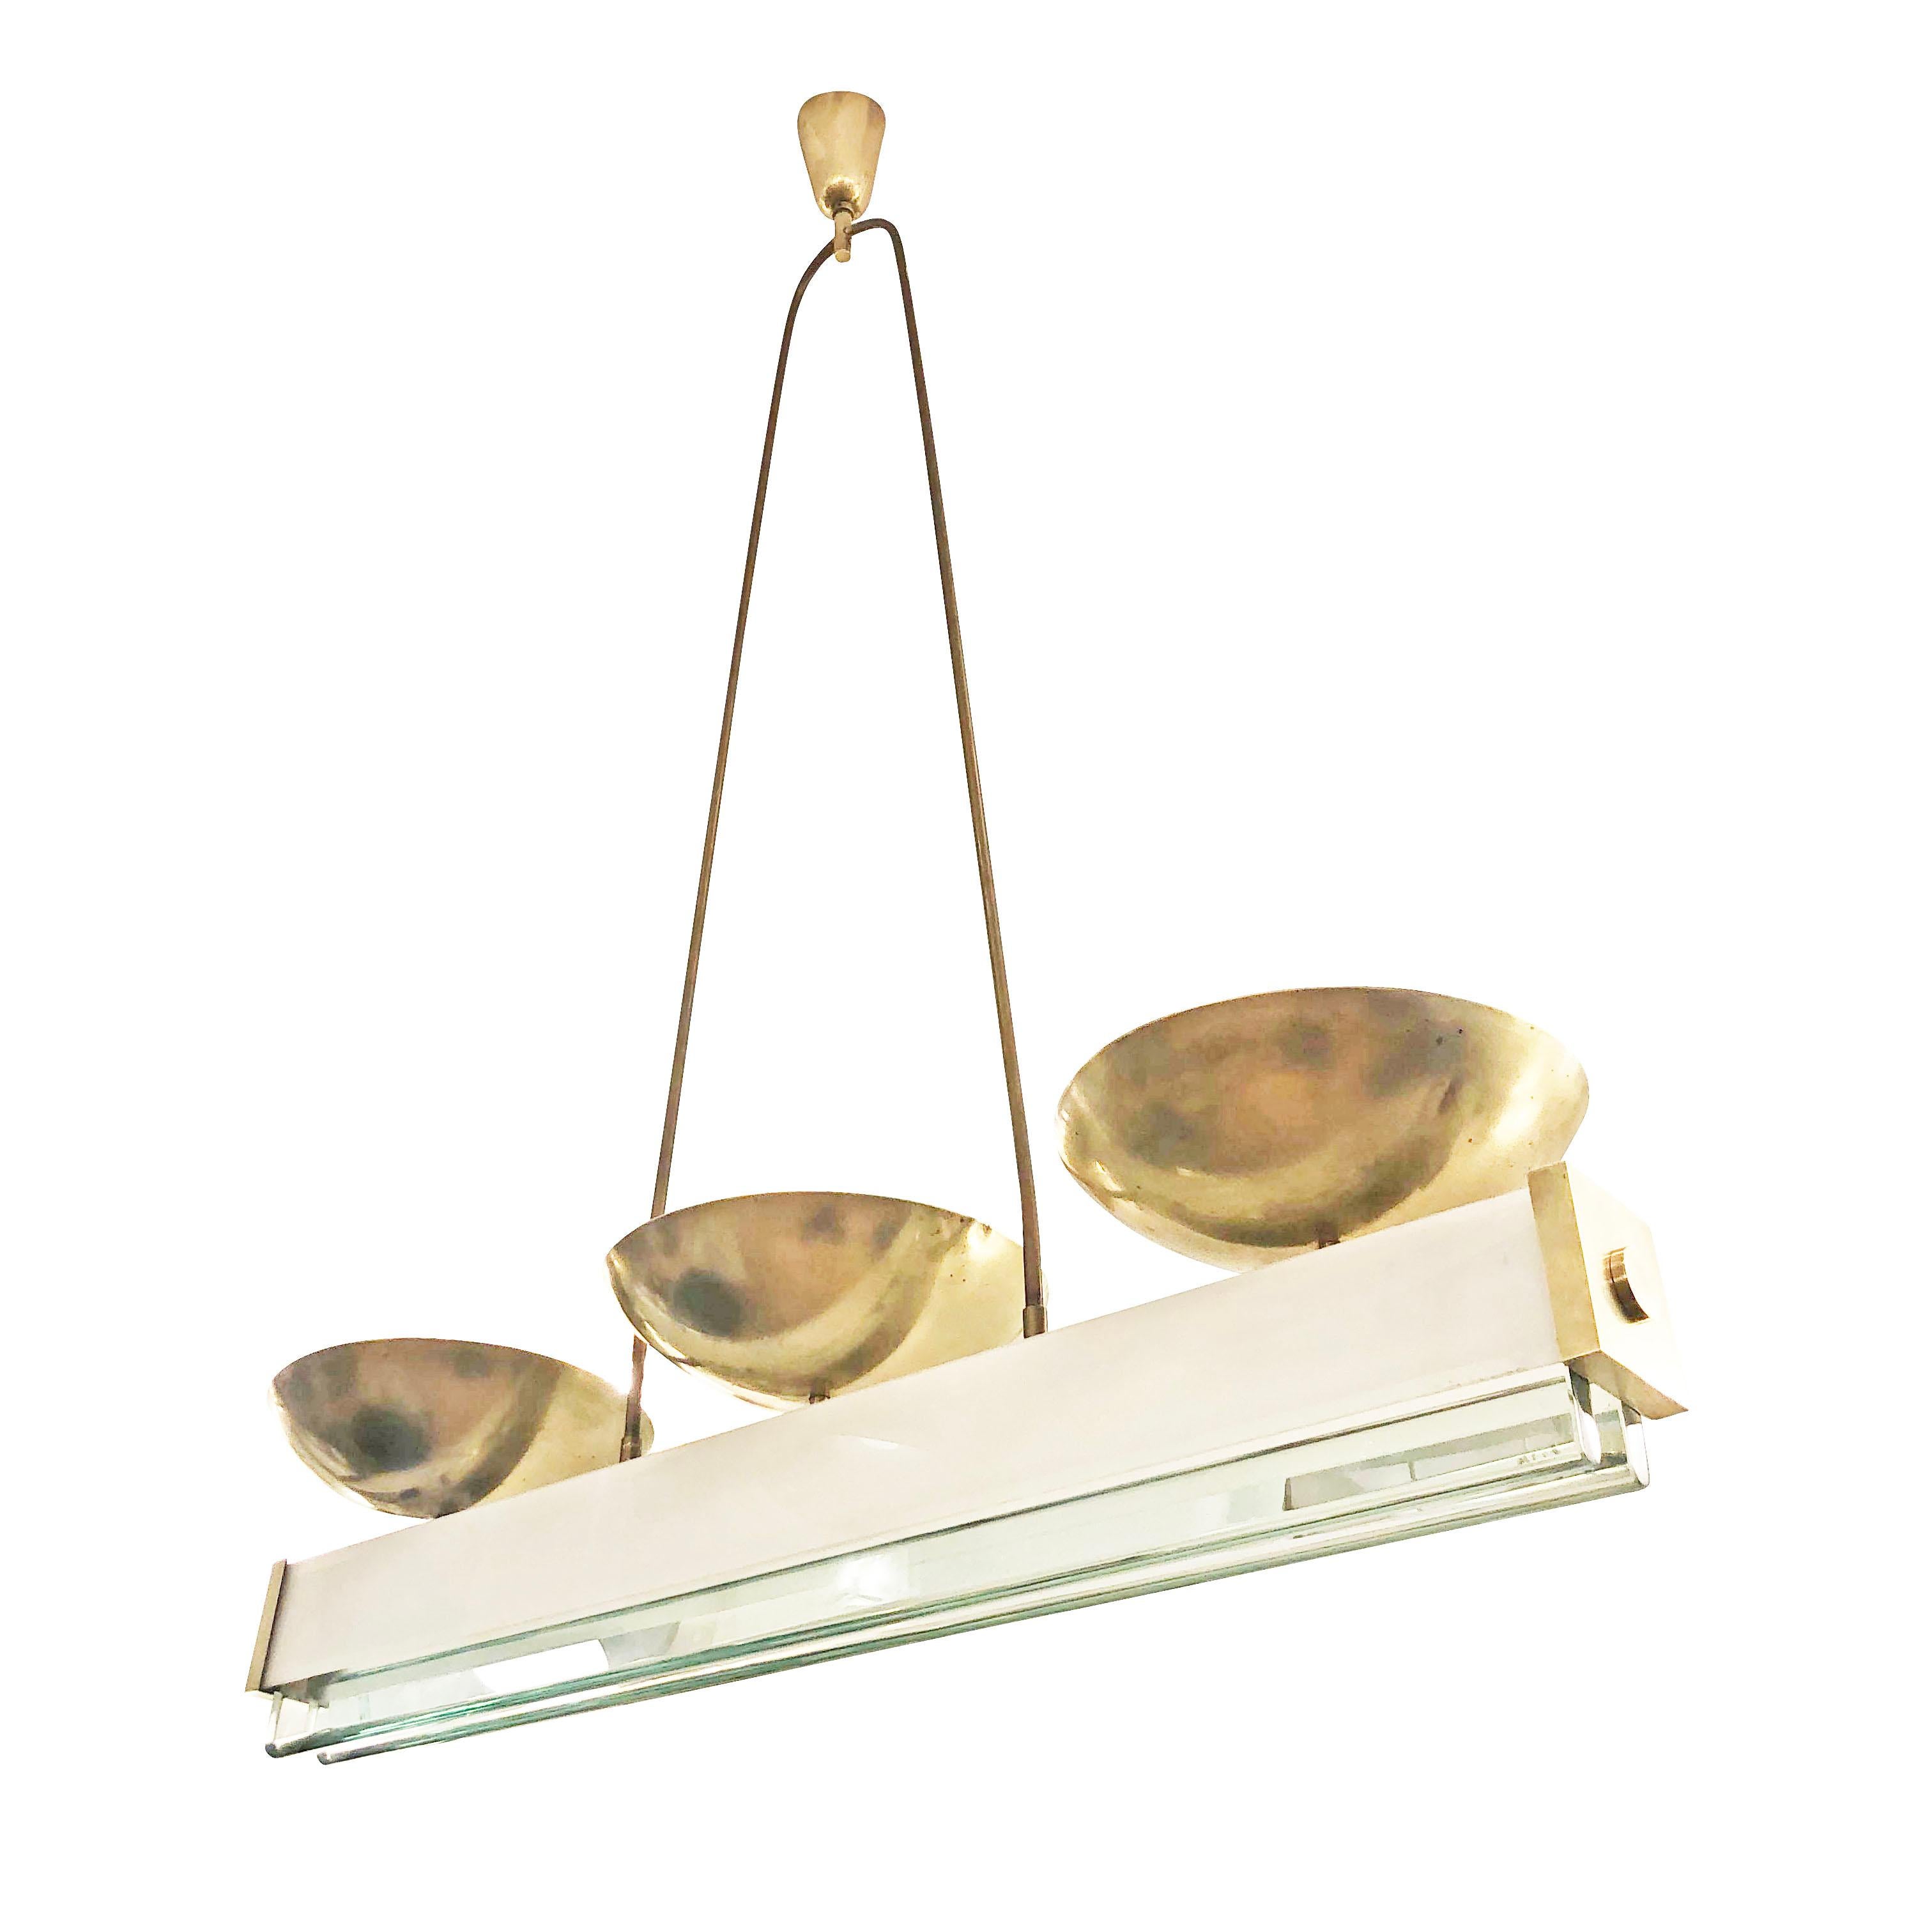 Italian midcentury chandelier attributed to Pietro Chiesa for Fontana Arte. Has three brass shades for up lighting and a rectangular body with four glasses for diffused and down lighting. The outer glasses are white and thin while the internal